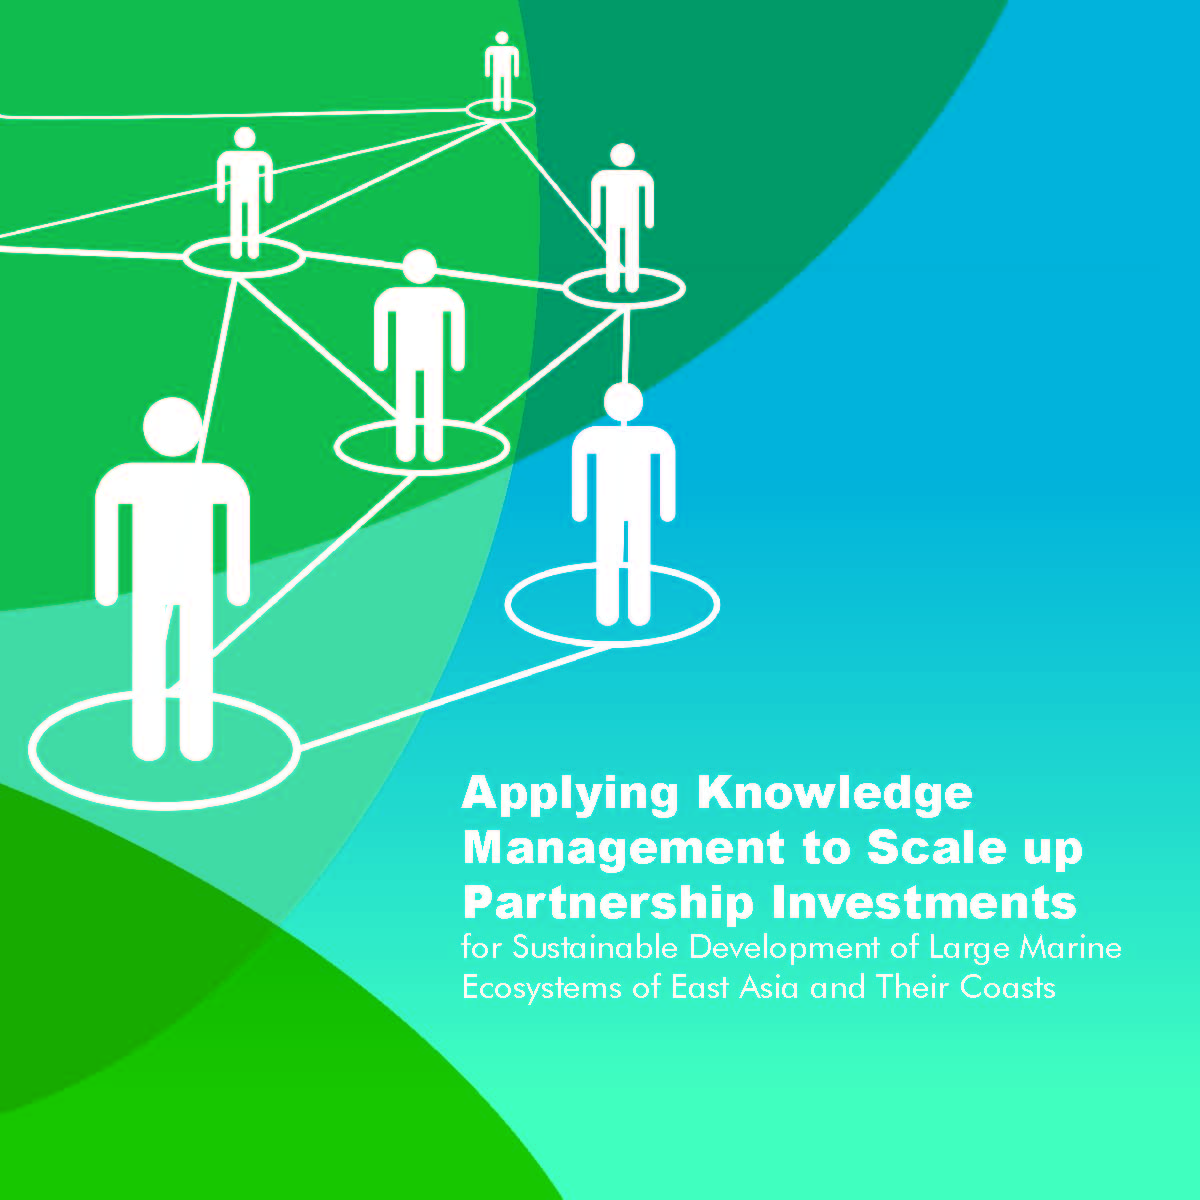 Applying Knowledge Management to Scale up Partnership Investments for Sustainable Development of Large Marine Ecosystems of East Asia and Their Coasts